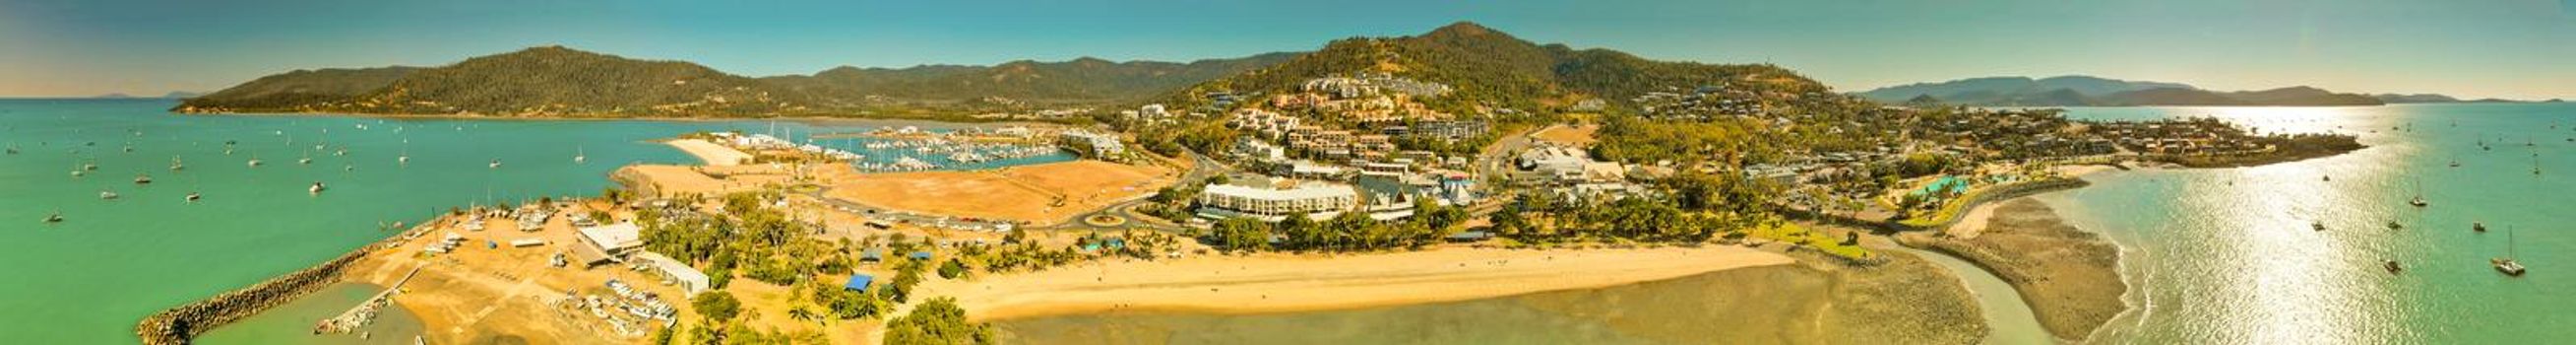 Panoramic aerial view of Airlie Beach on a beautiful sunny day, Australia